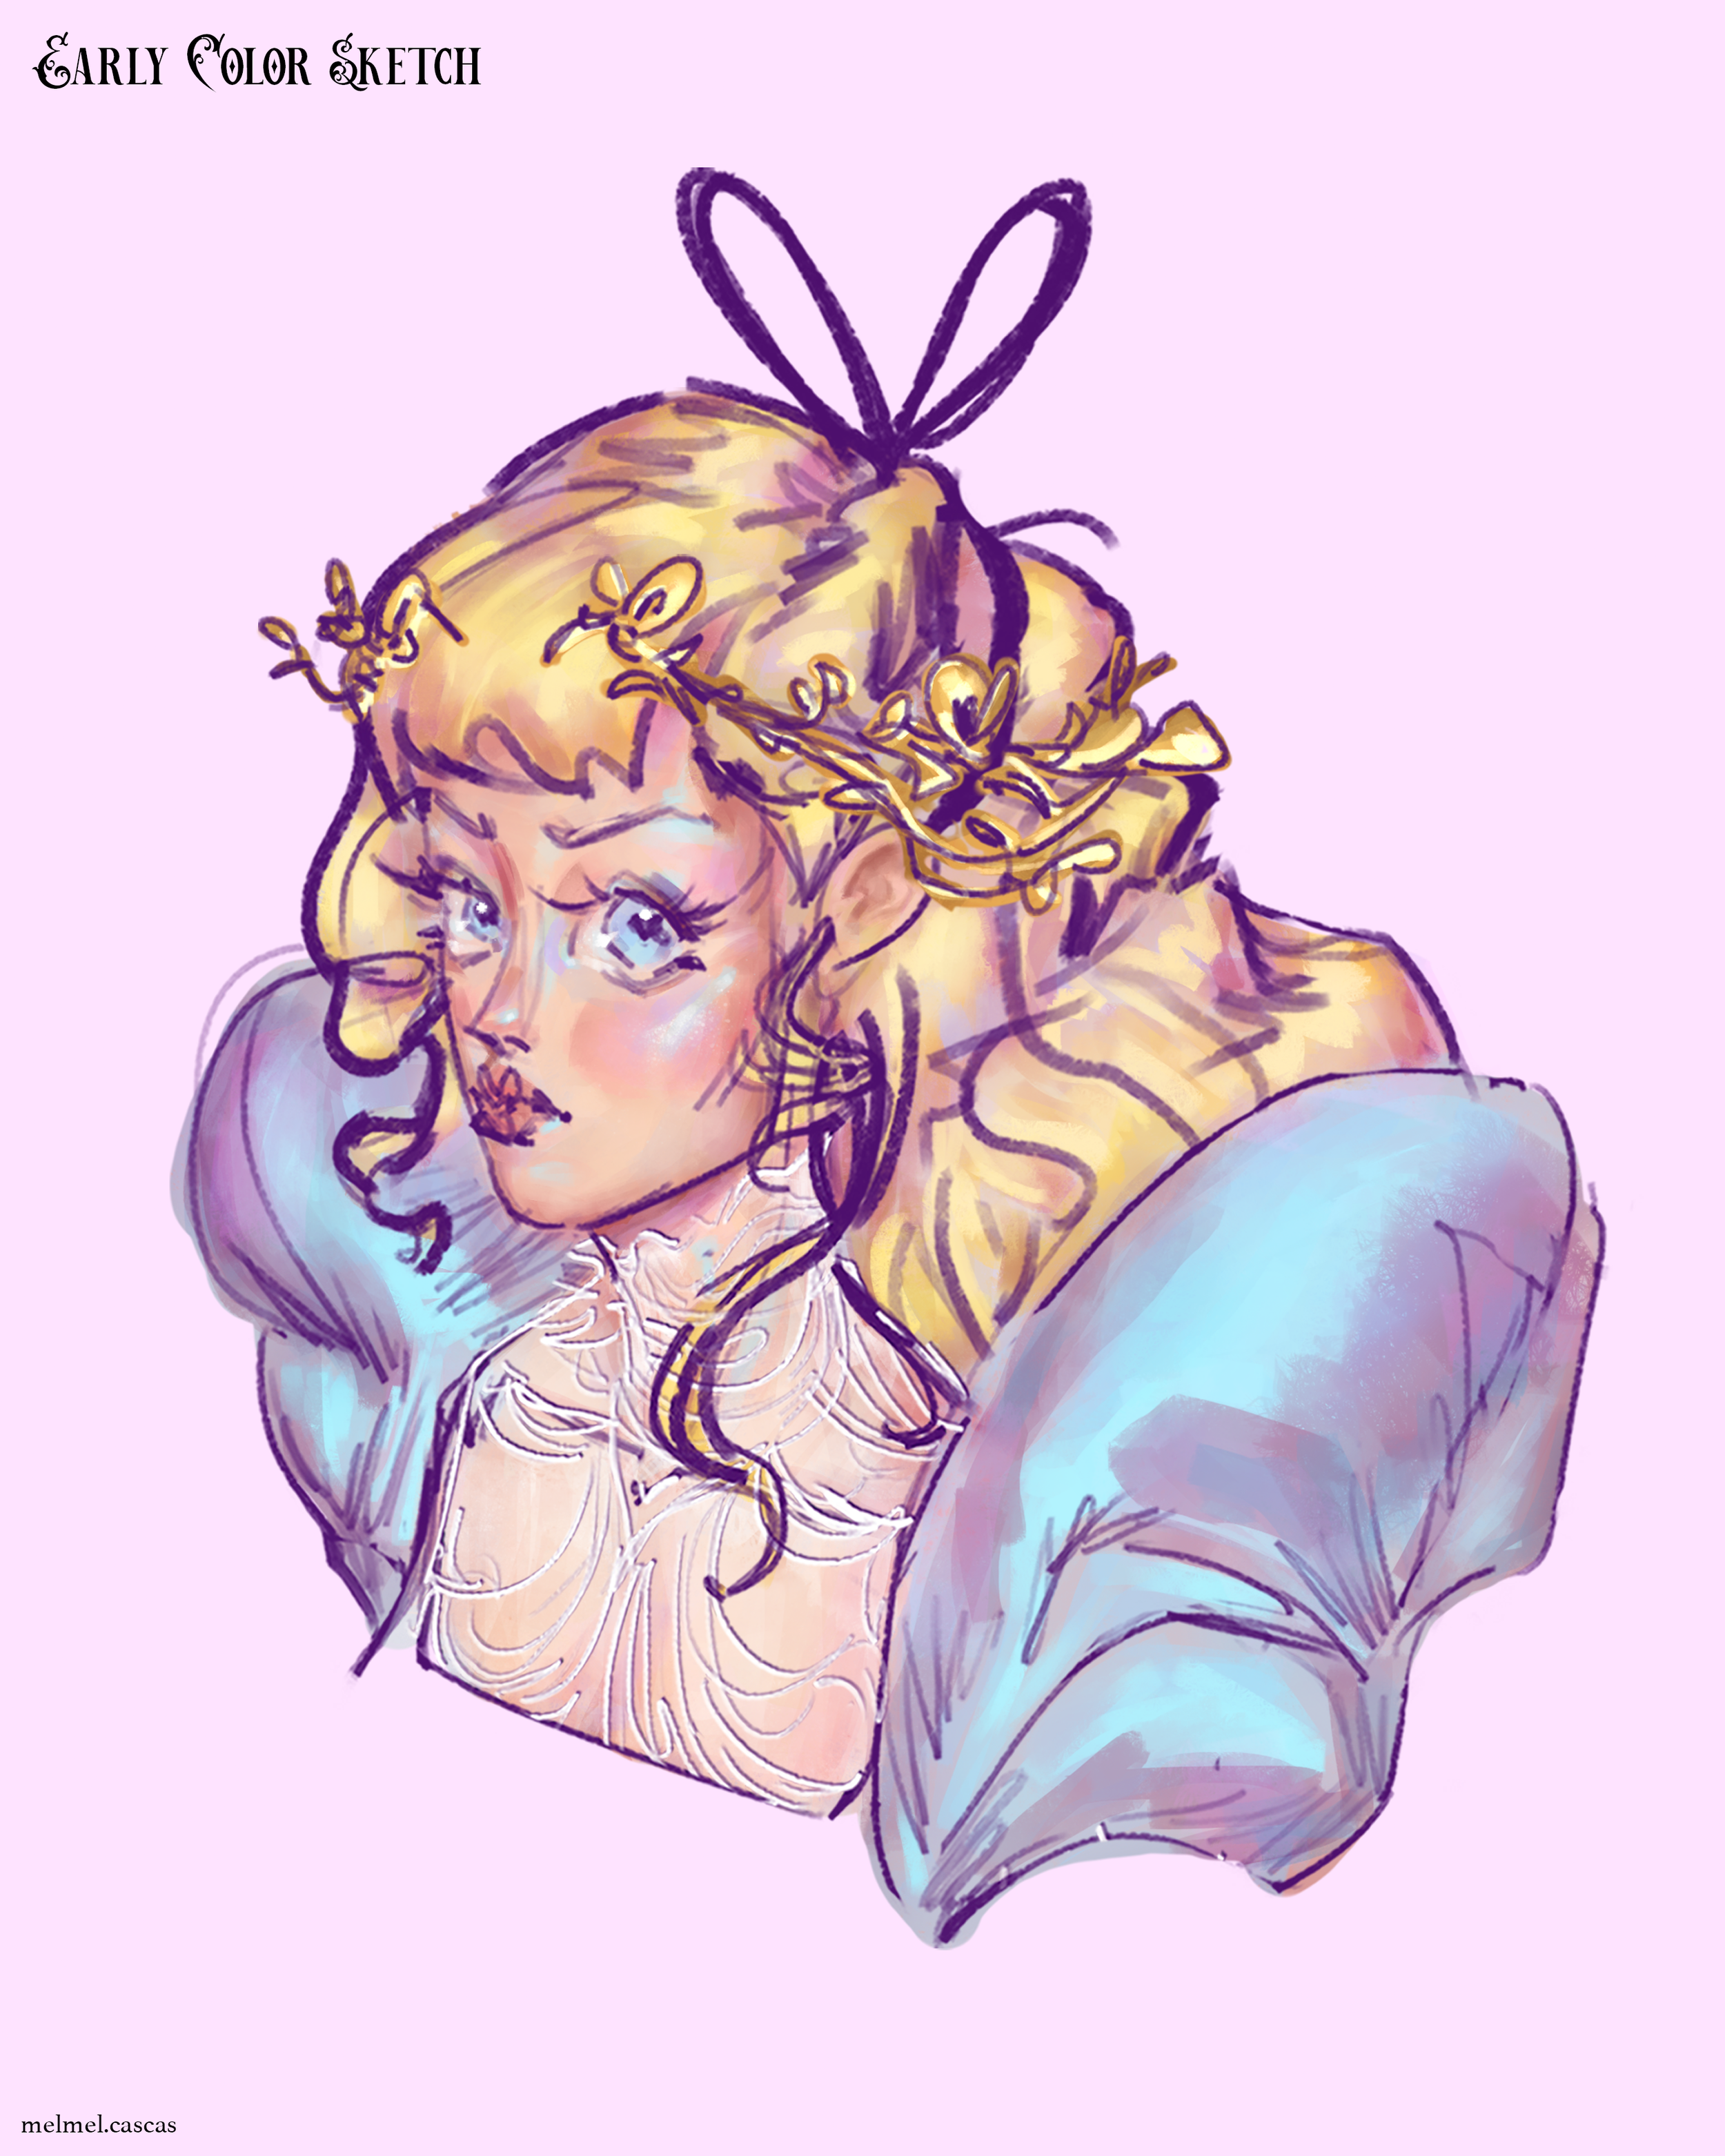 early color sketch of alice